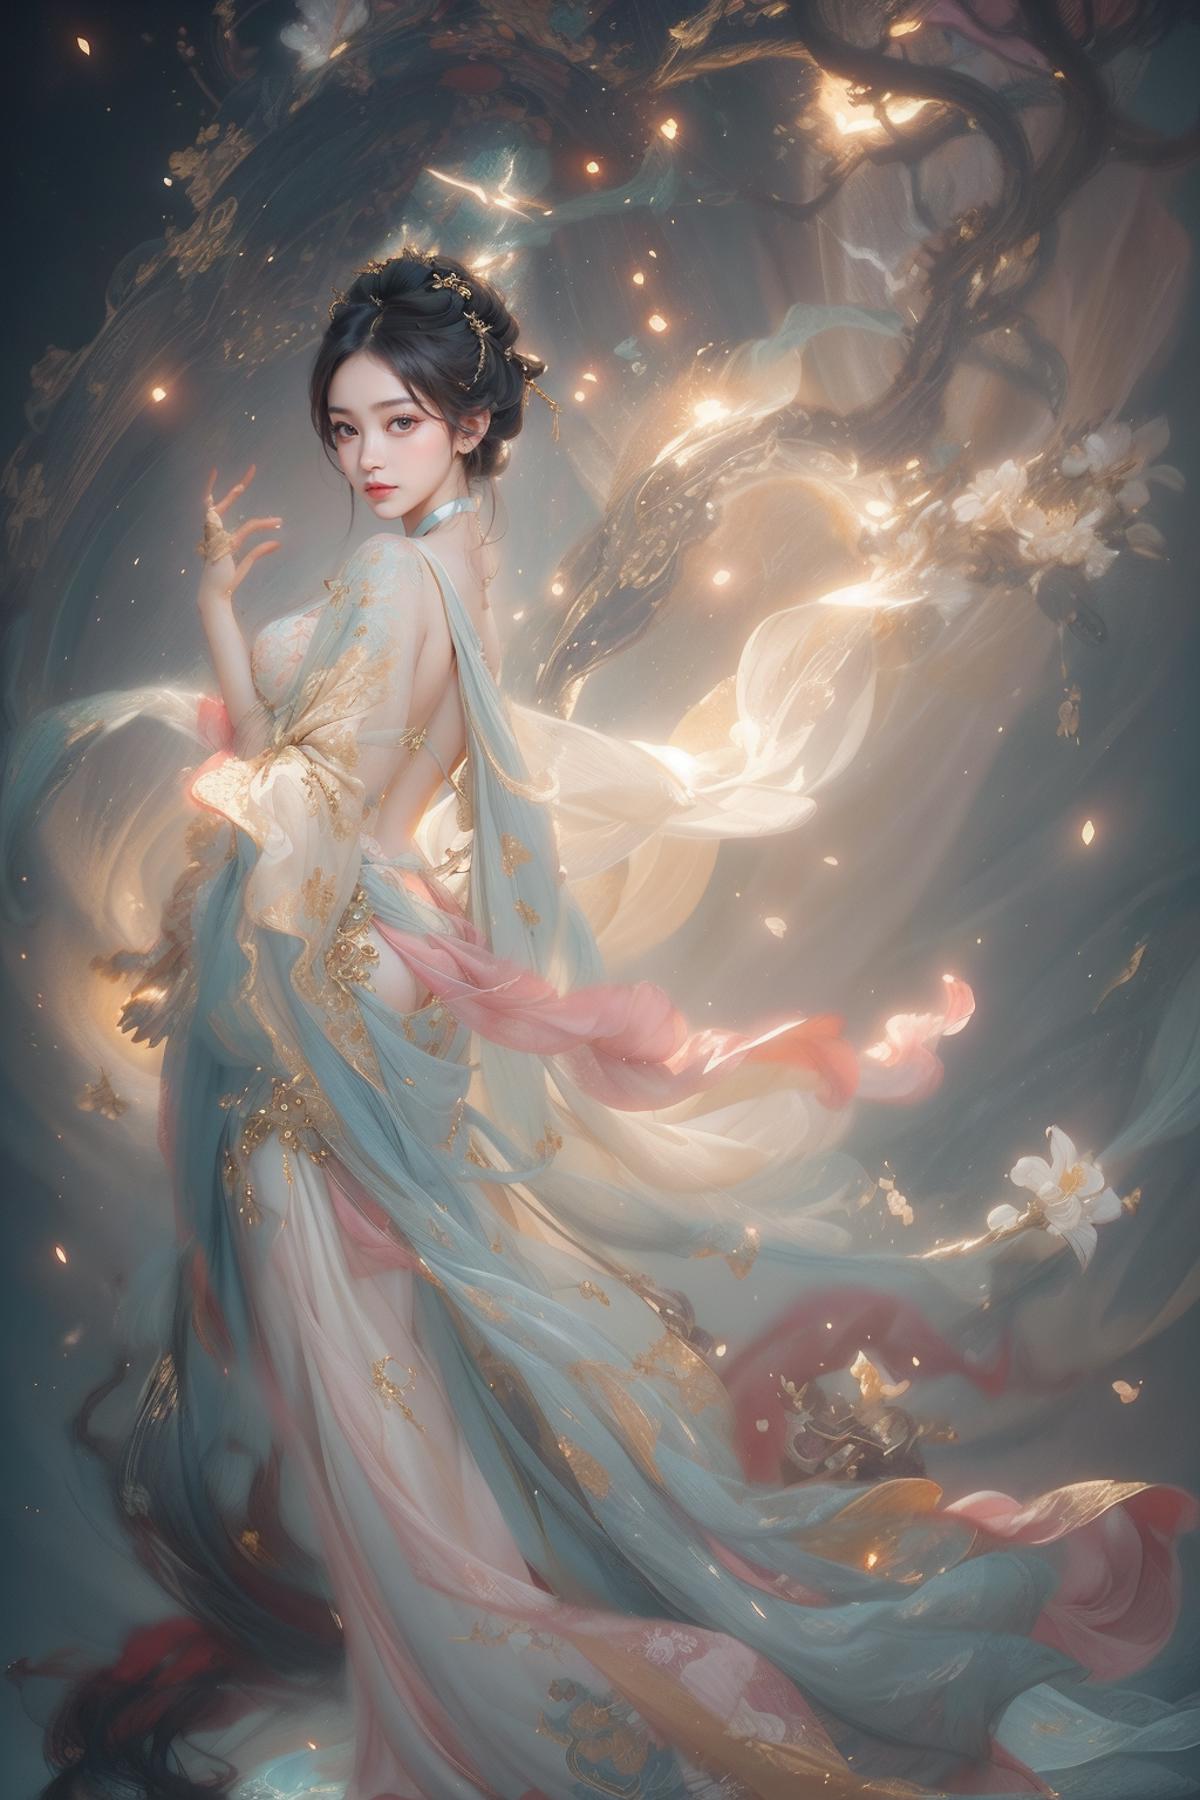 A beautifully illustrated Asian woman with a blue dress, an elaborate headdress, and a flowing white scarf.